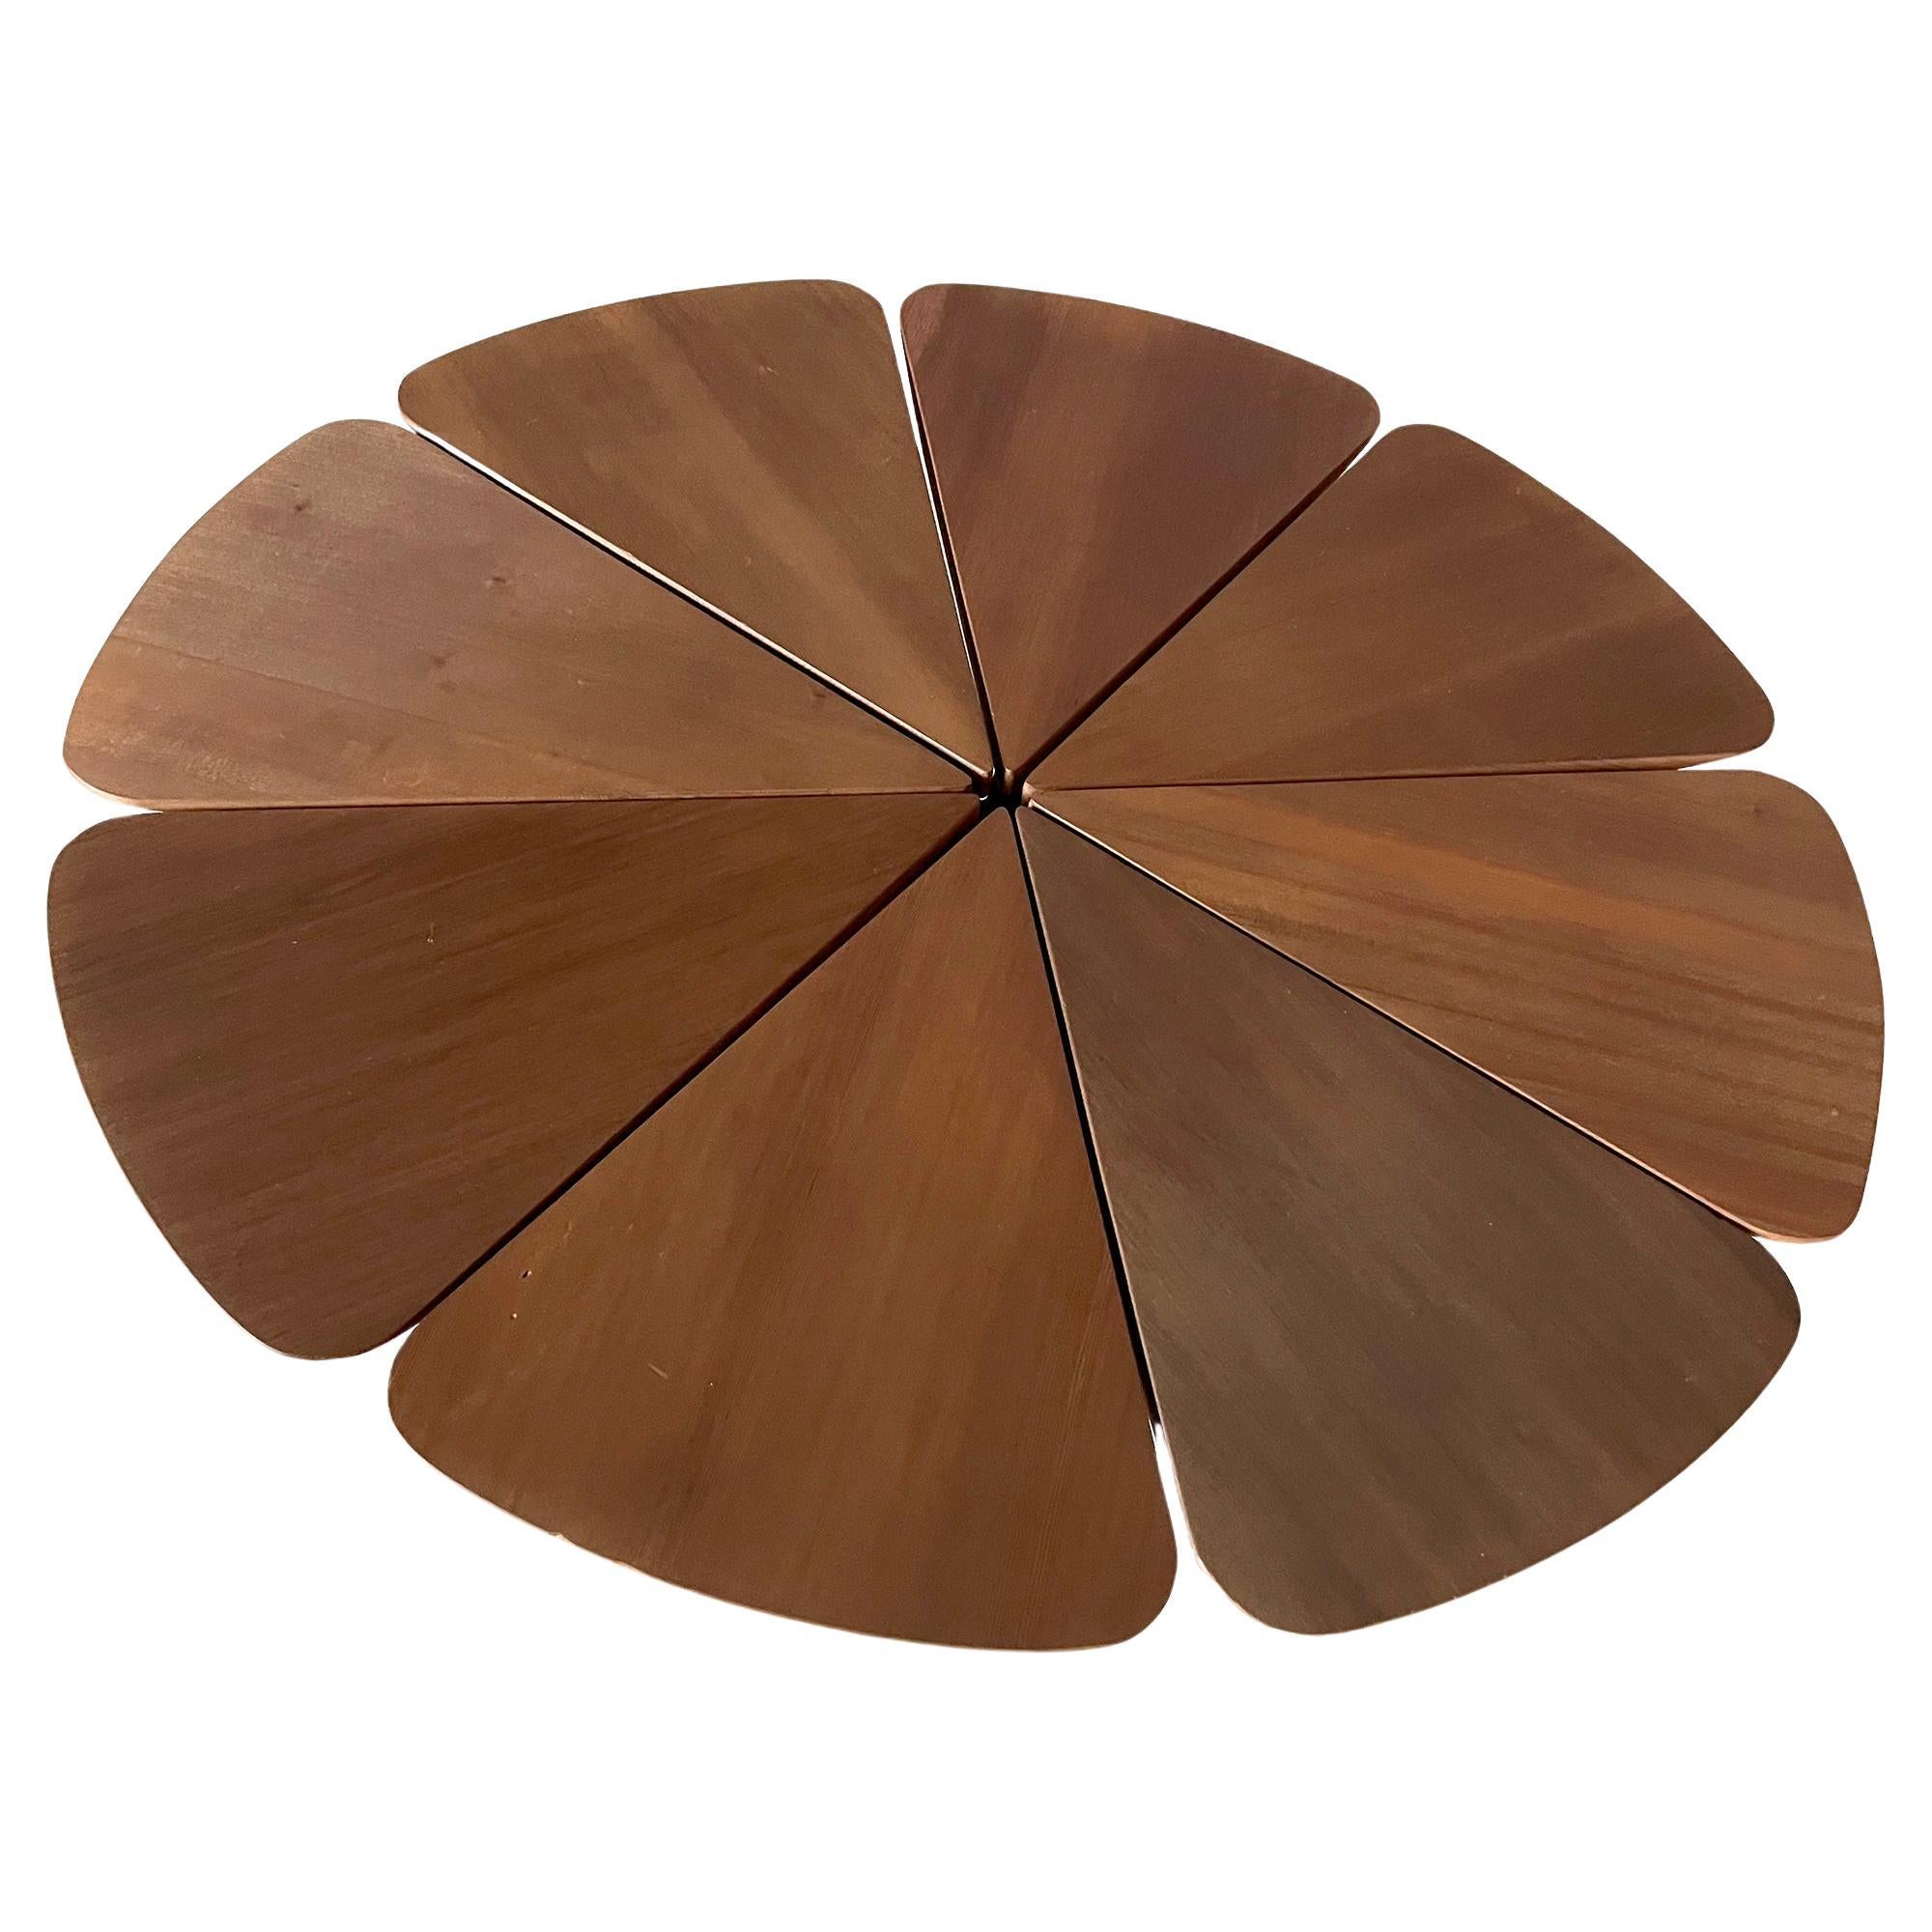 Vintage 1960's redwood petal coffee table designed by Richard Schultz for Knoll.  table measures 15